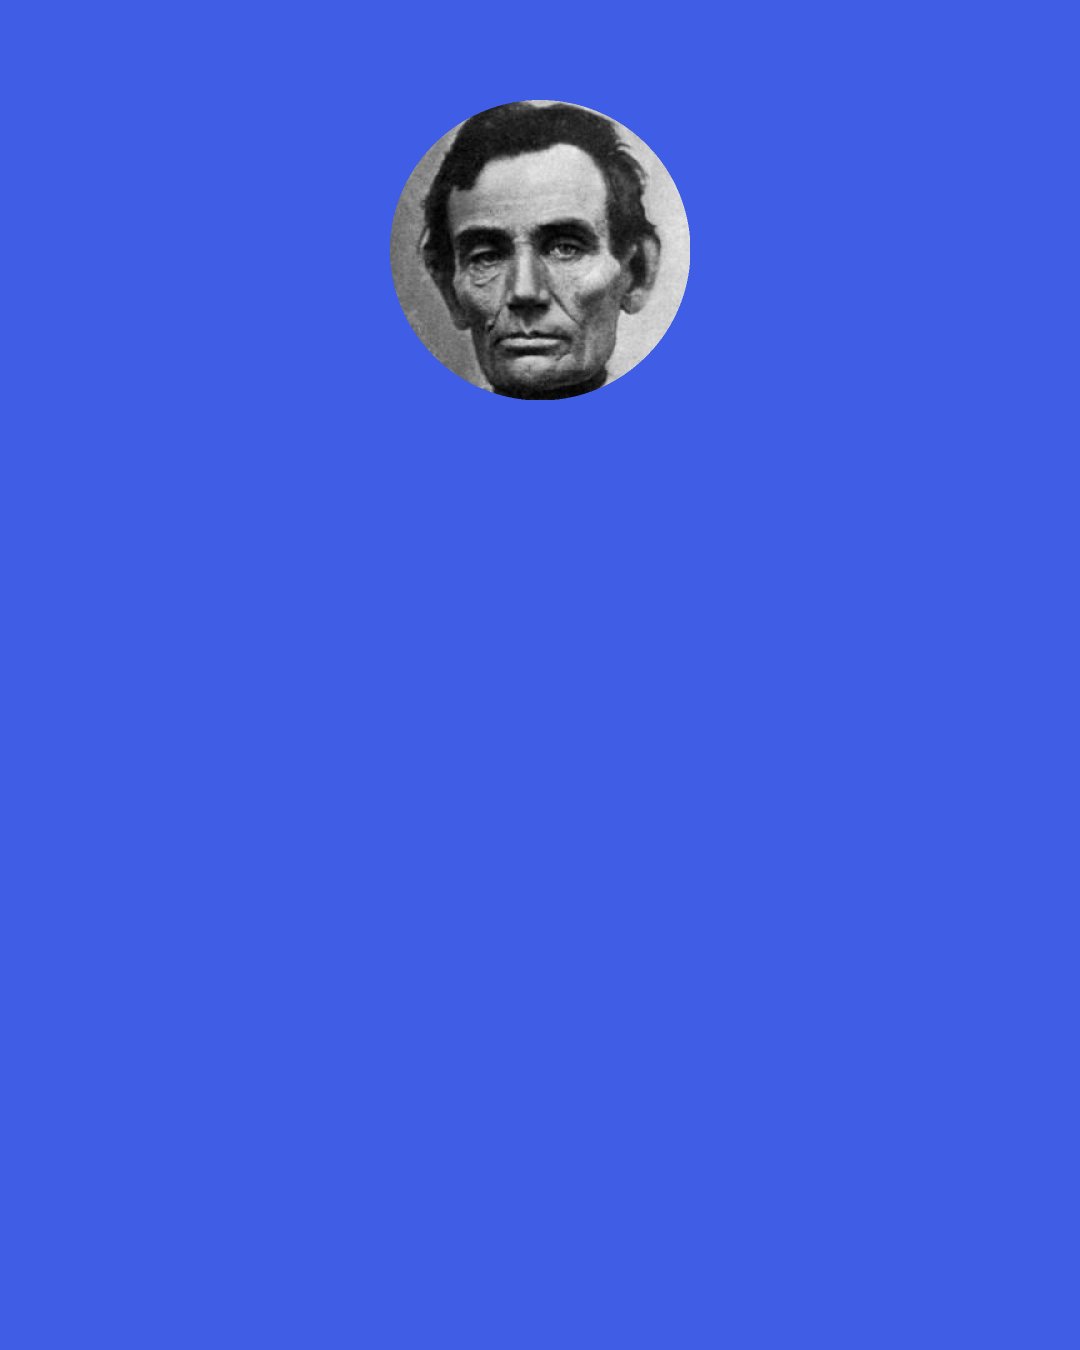 Abraham Lincoln: An inspection of the Constitution will show that the right of property in a slave in not "distinctly and expressly affirmed" in it.